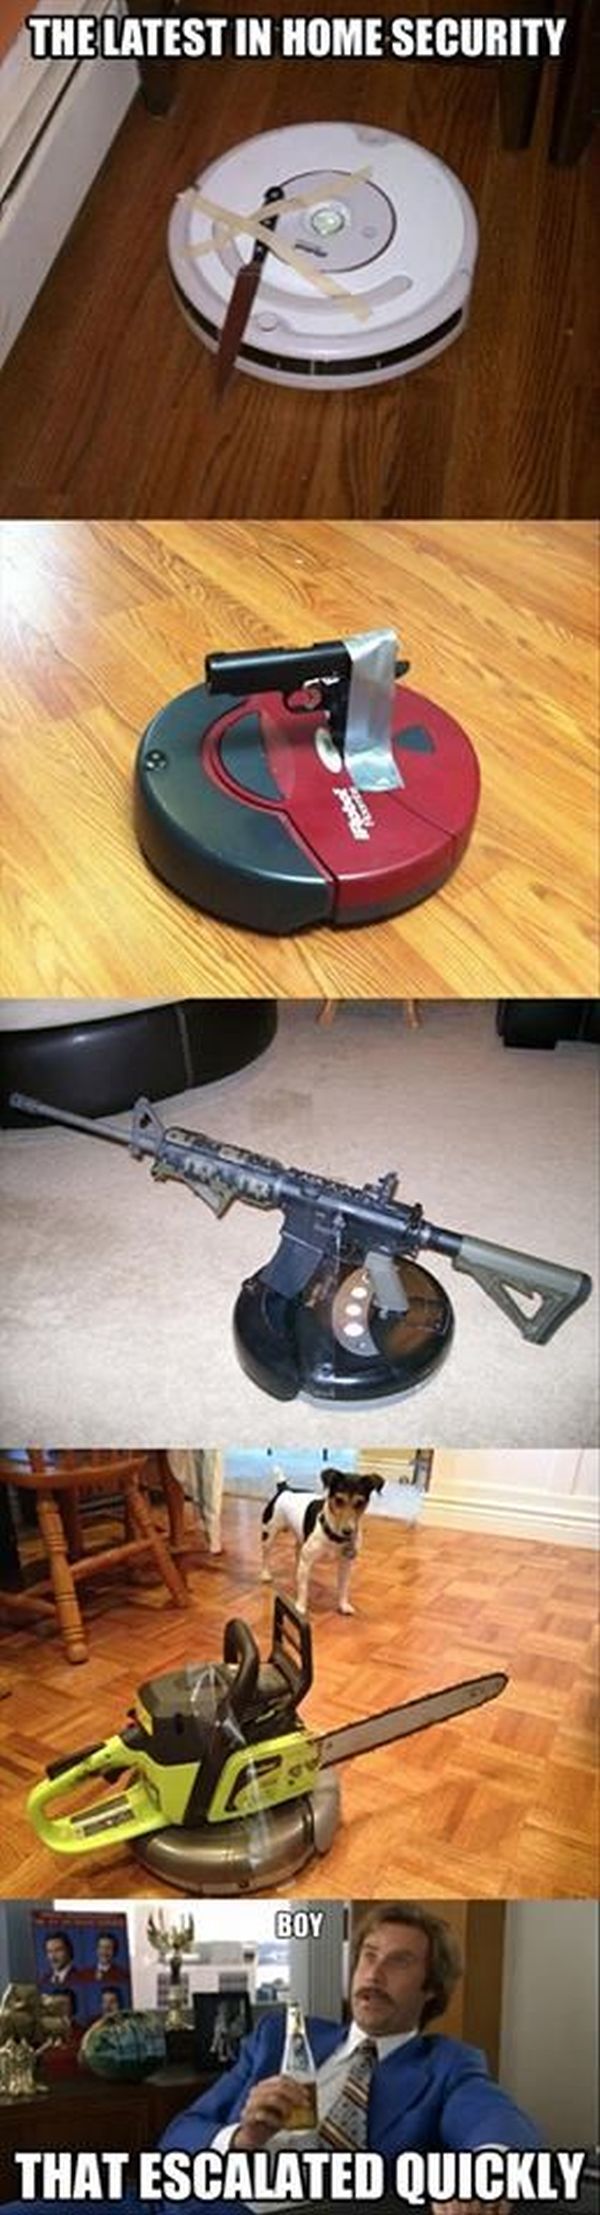 The Latest In Home Security - Funny pictures